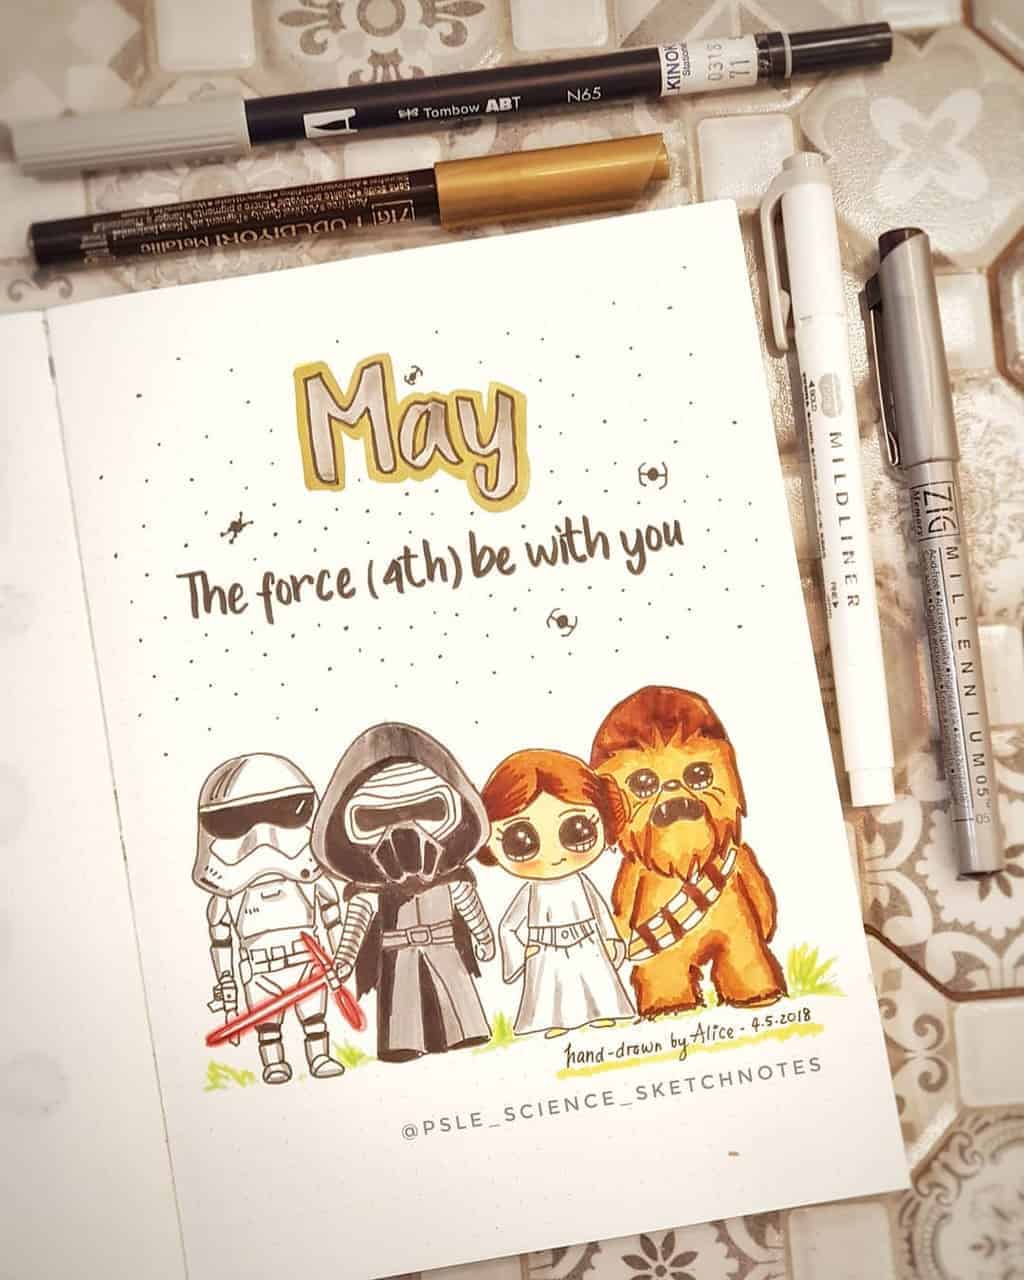 Star Wars Bullet Journal Cover Page by @psle_science_sketchnotes